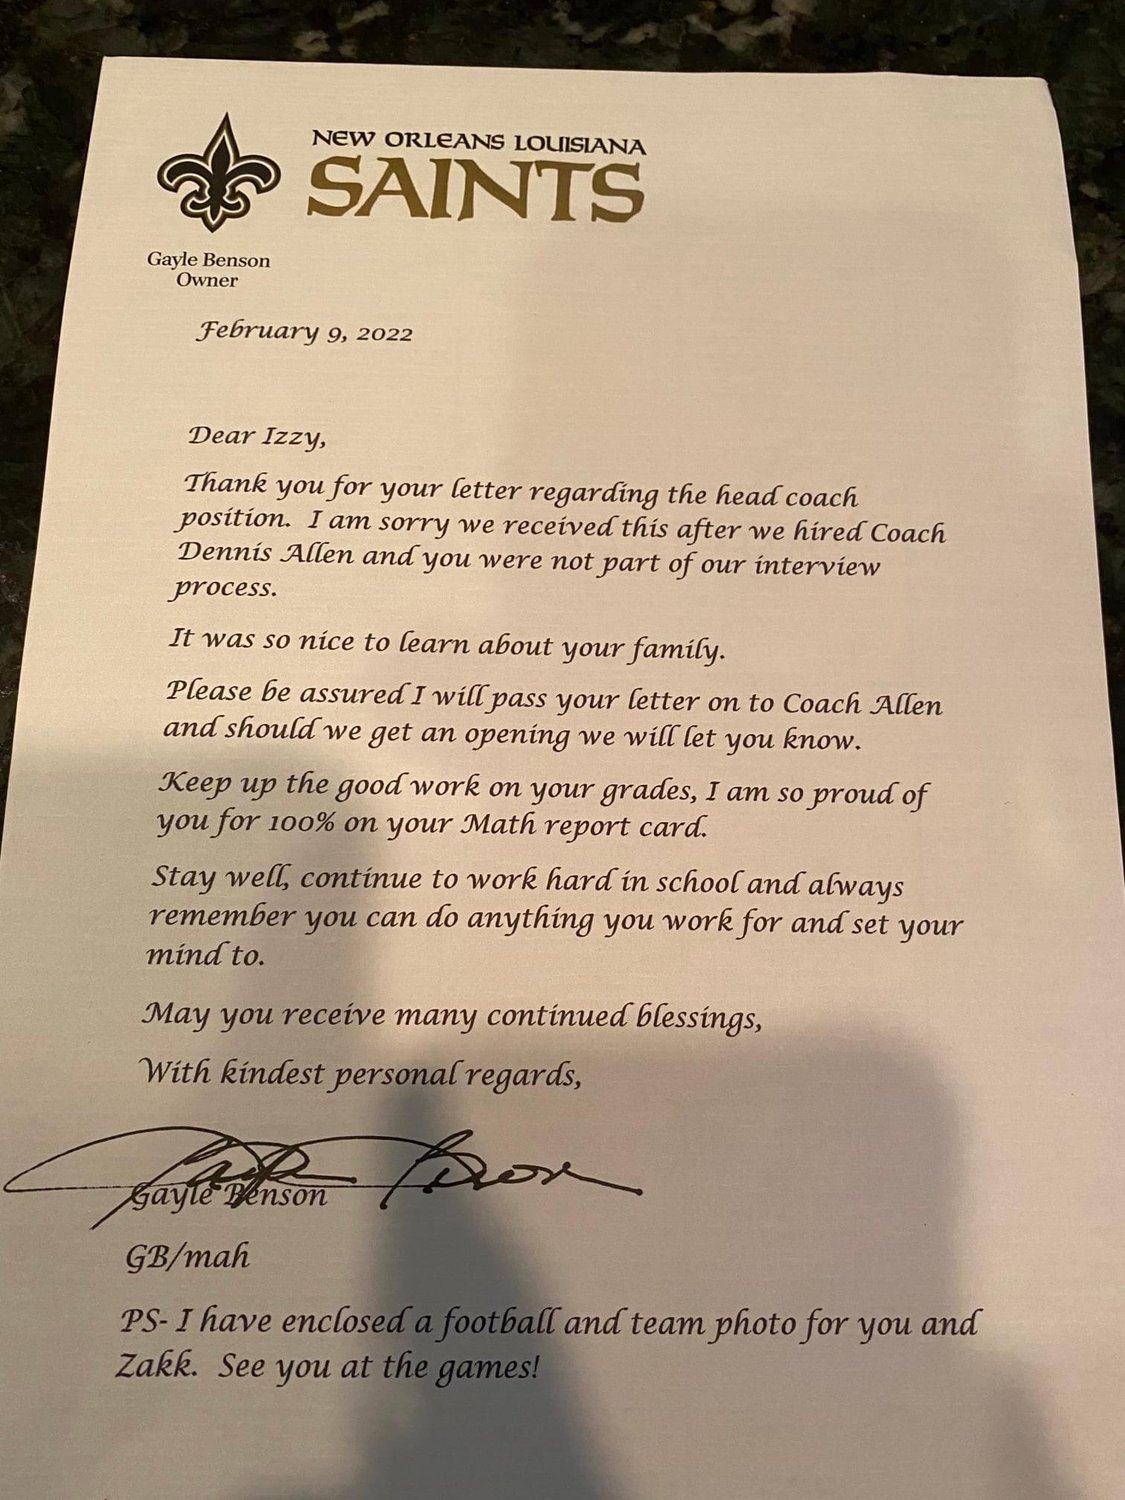 Izzy Sherman's letter from the Saints